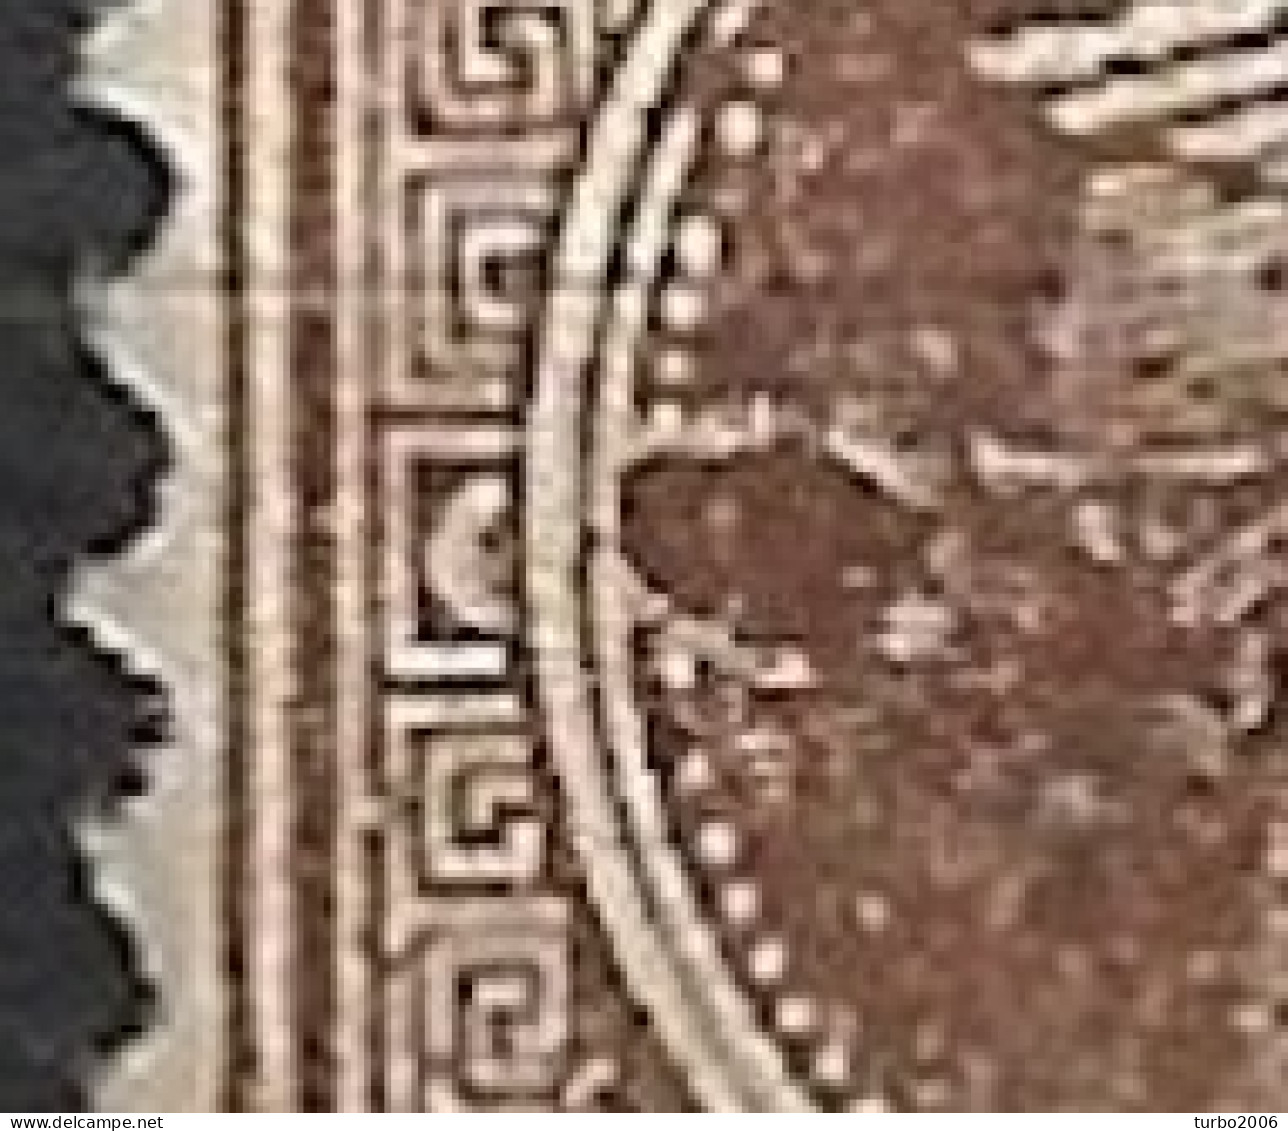 GREECE Large Colourspot In 1891-1896 Small Hermes Heads 1 L Brown Perforated Vl. 107 - Used Stamps